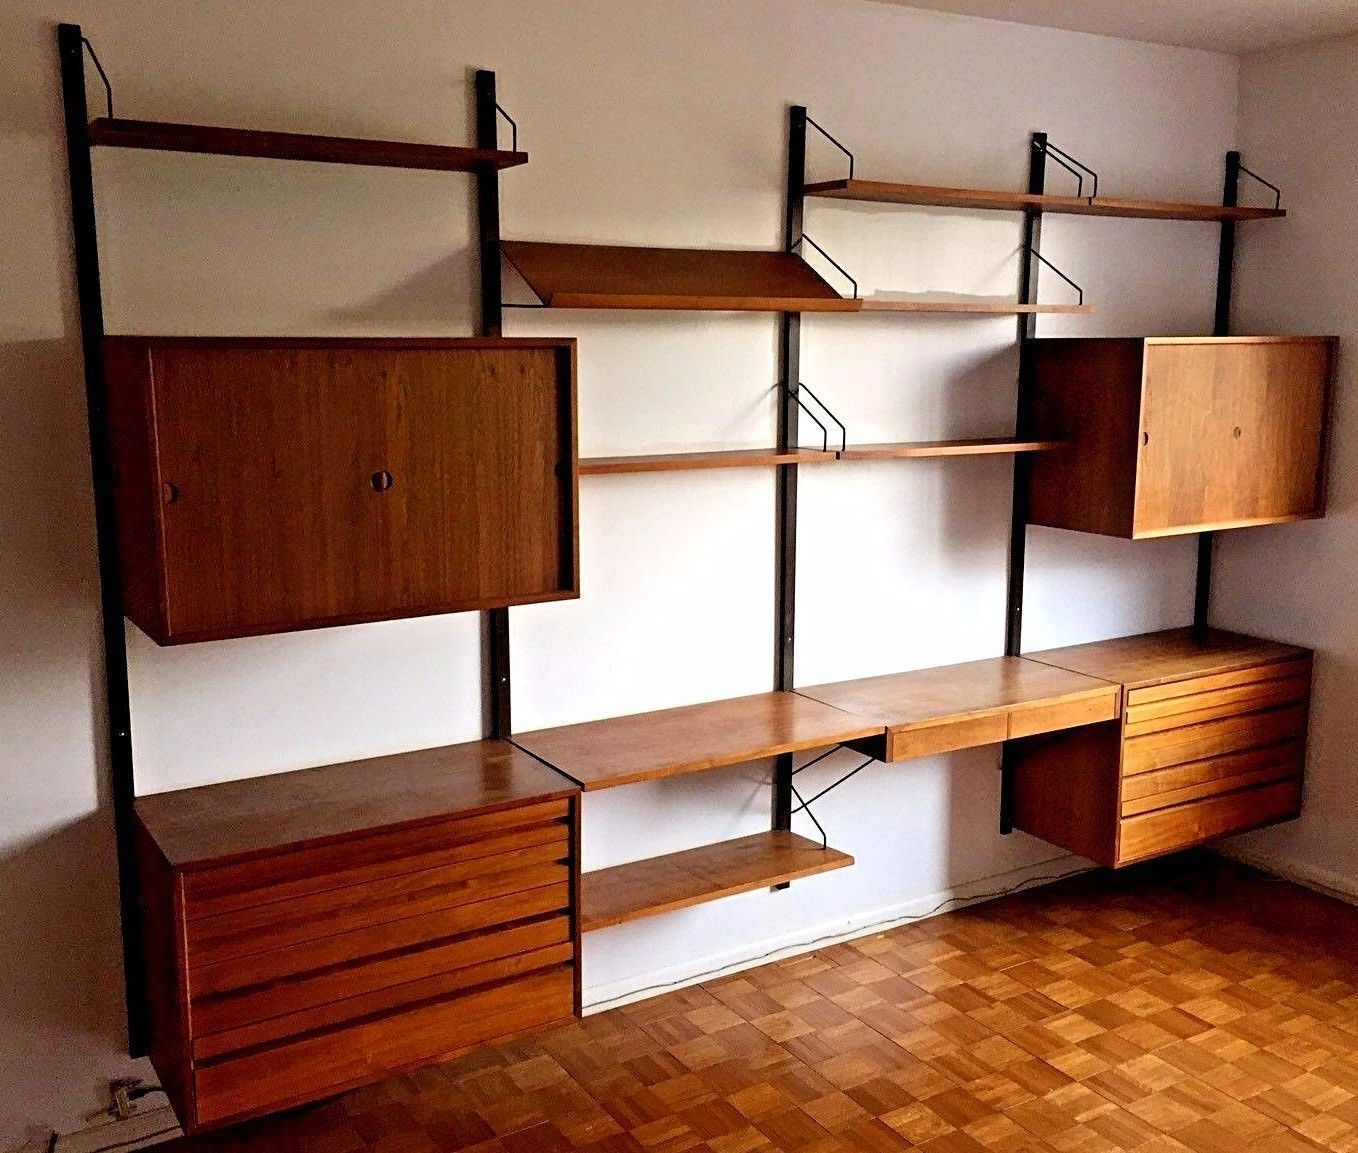 Revamp Your Space with a Stylish Mid Century Modern Wall Shelving Unit